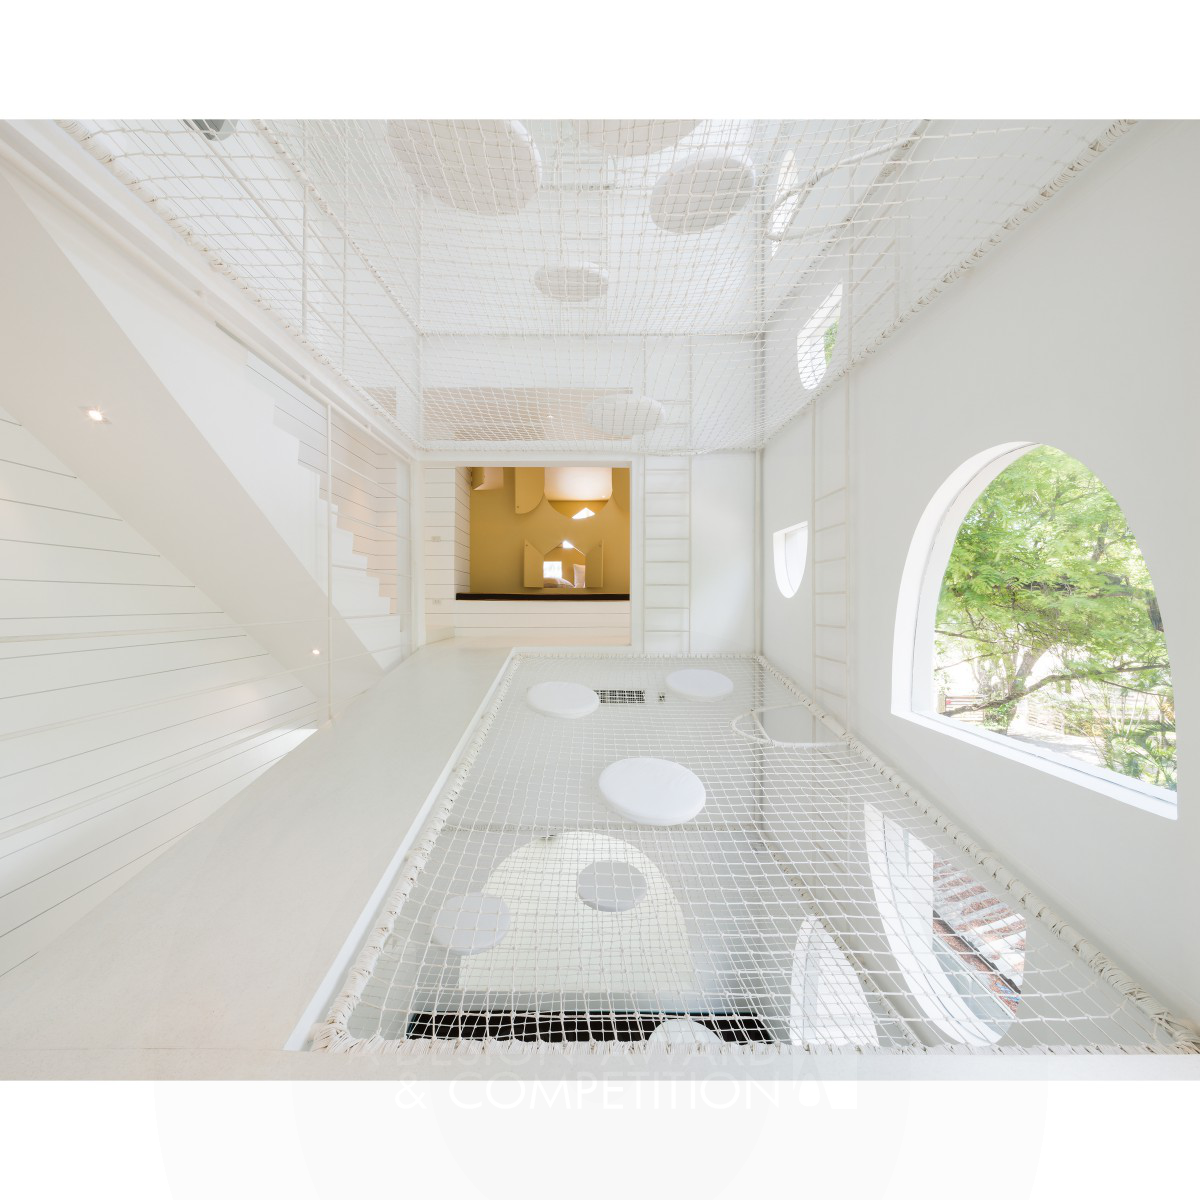 Jerry House residential : private house by onion